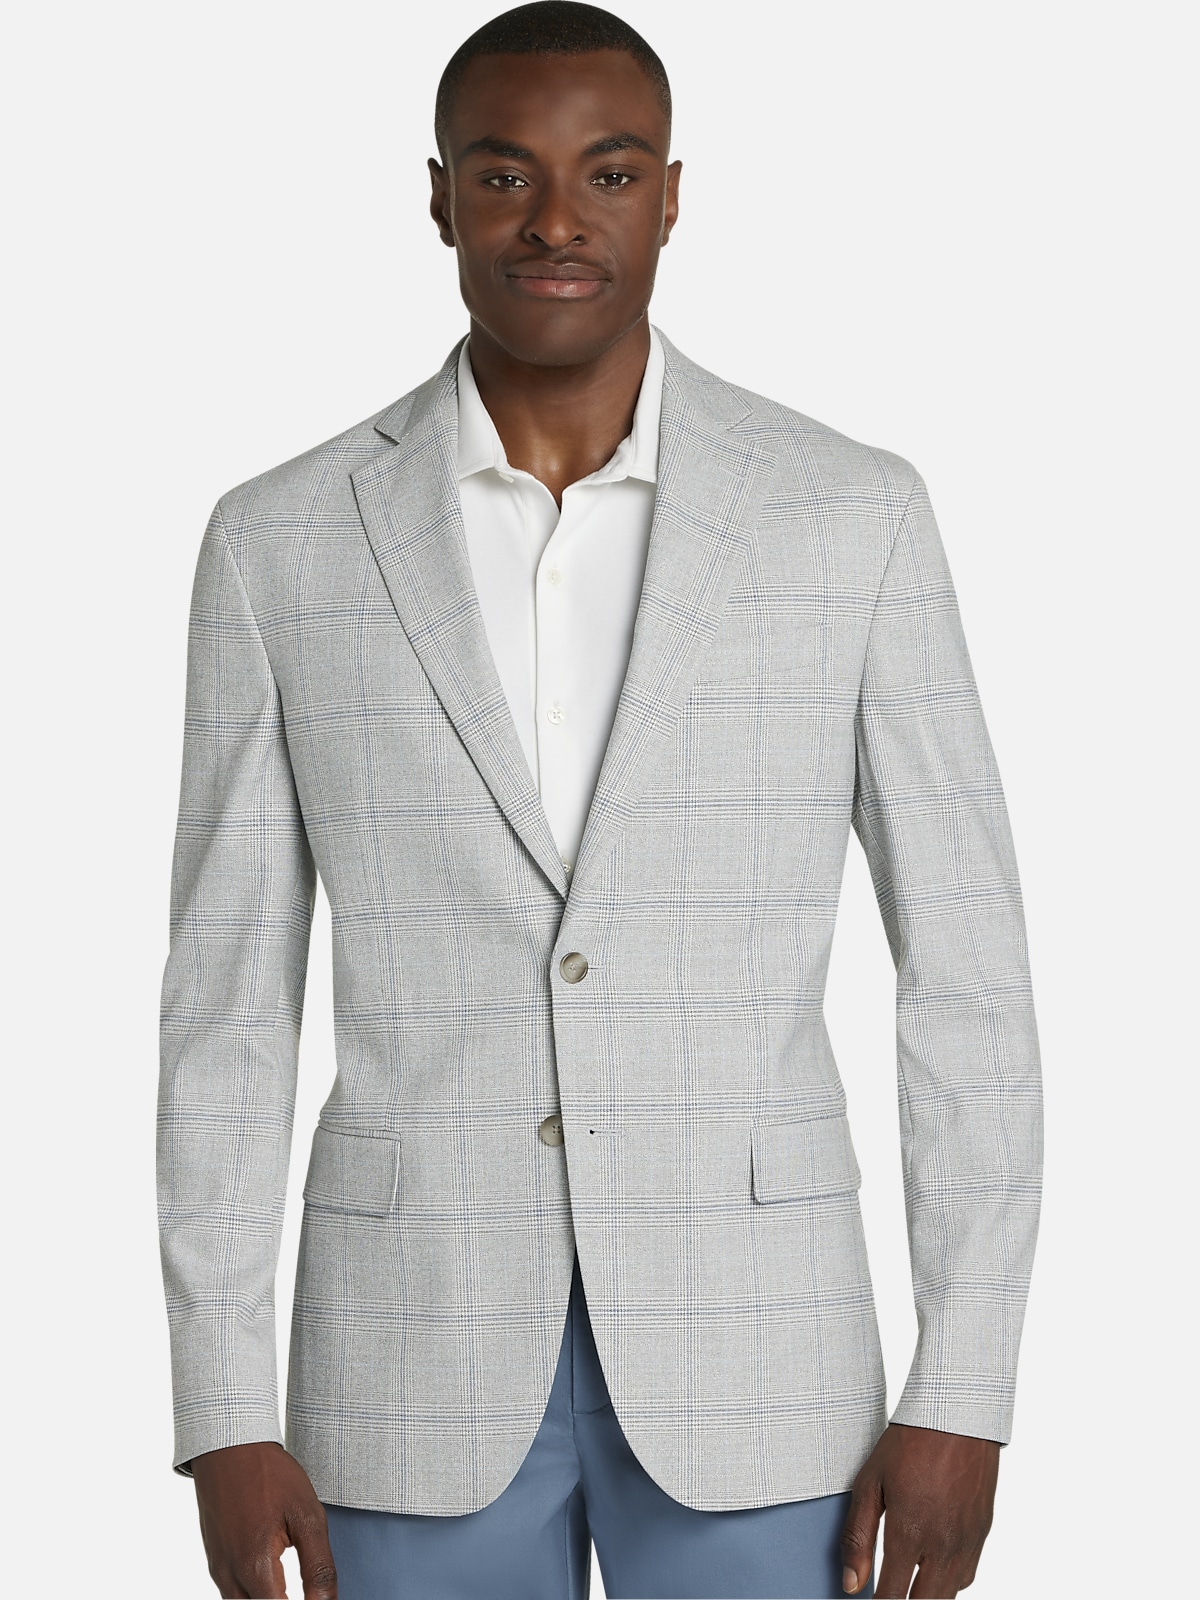 Pronto Uomo Modern Fit Check Sport Coat | All Clearance $39.99| Men's ...